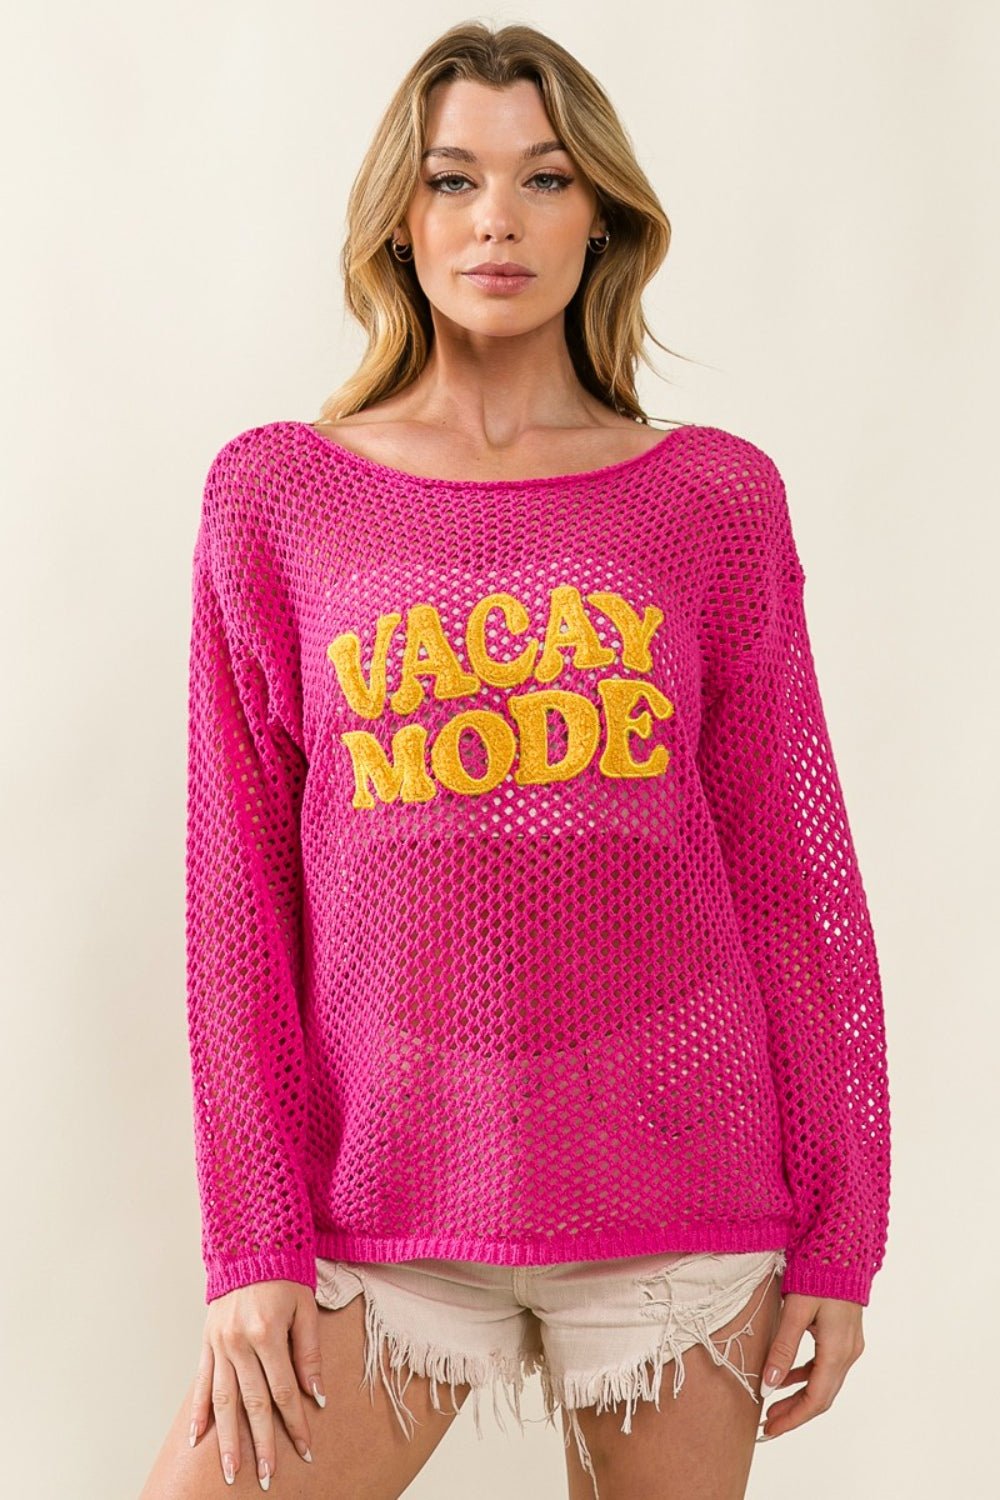 BiBi VACAY MODE Embroidered Knit Cover Up - Happily Ever Atchison Shop Co.